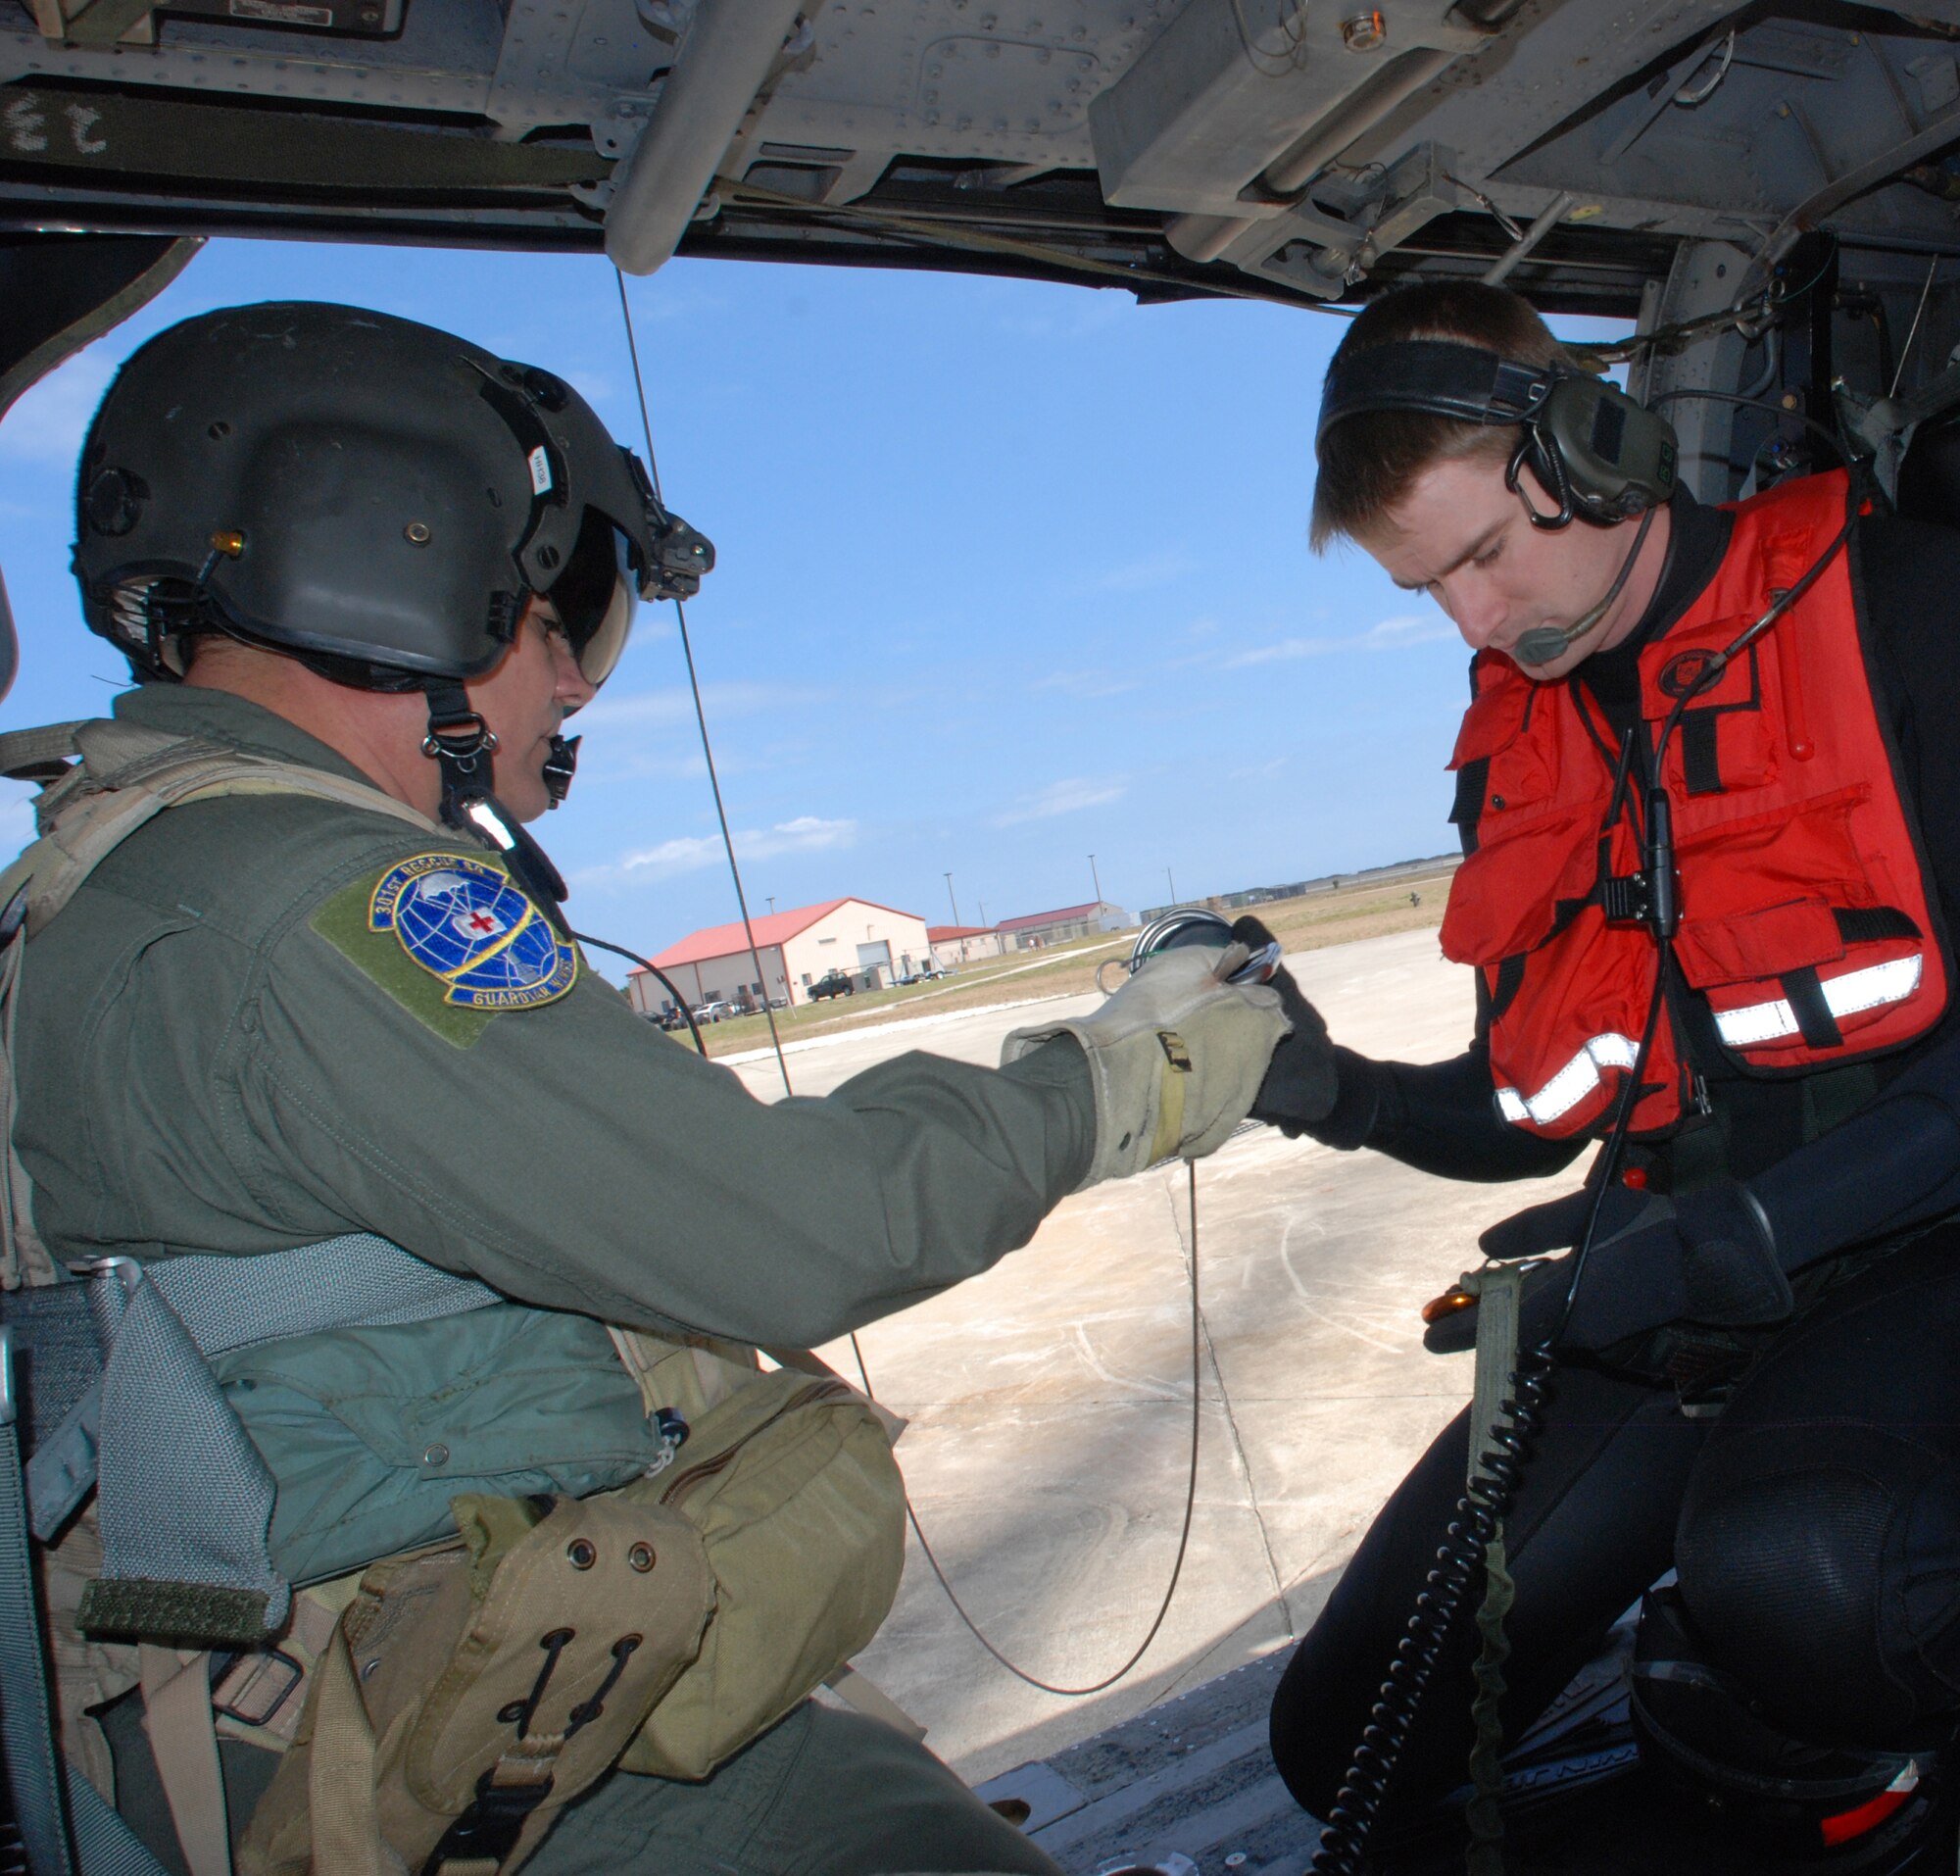 PATRICK AIR FORCE BASE, Fla. - Air Force Reserve Chief Master Sgt. Lazaro Ibarra, helicopter flight engineer, 920th Rescue Wing here, hands a hoisting cable to Master Sgt. Josiah Blanton, an Air Force Reserve Pararescueman (PJ) from the 304th Rescue Squadron base at Portland, Ore. The 304th RQS is a geographically separated unit (GSU) of the 920th RQW - they fall unter the 920th's jurisdiction but are stationed on the West Coast. For the PJs and helicopter crews, training together becomes important to keep camaraderie between the different crews and the different terrain is essential for real-world rescue scenarios. (U.S. Air Force photo/Staff Sgt. Leslie Kraushaar)